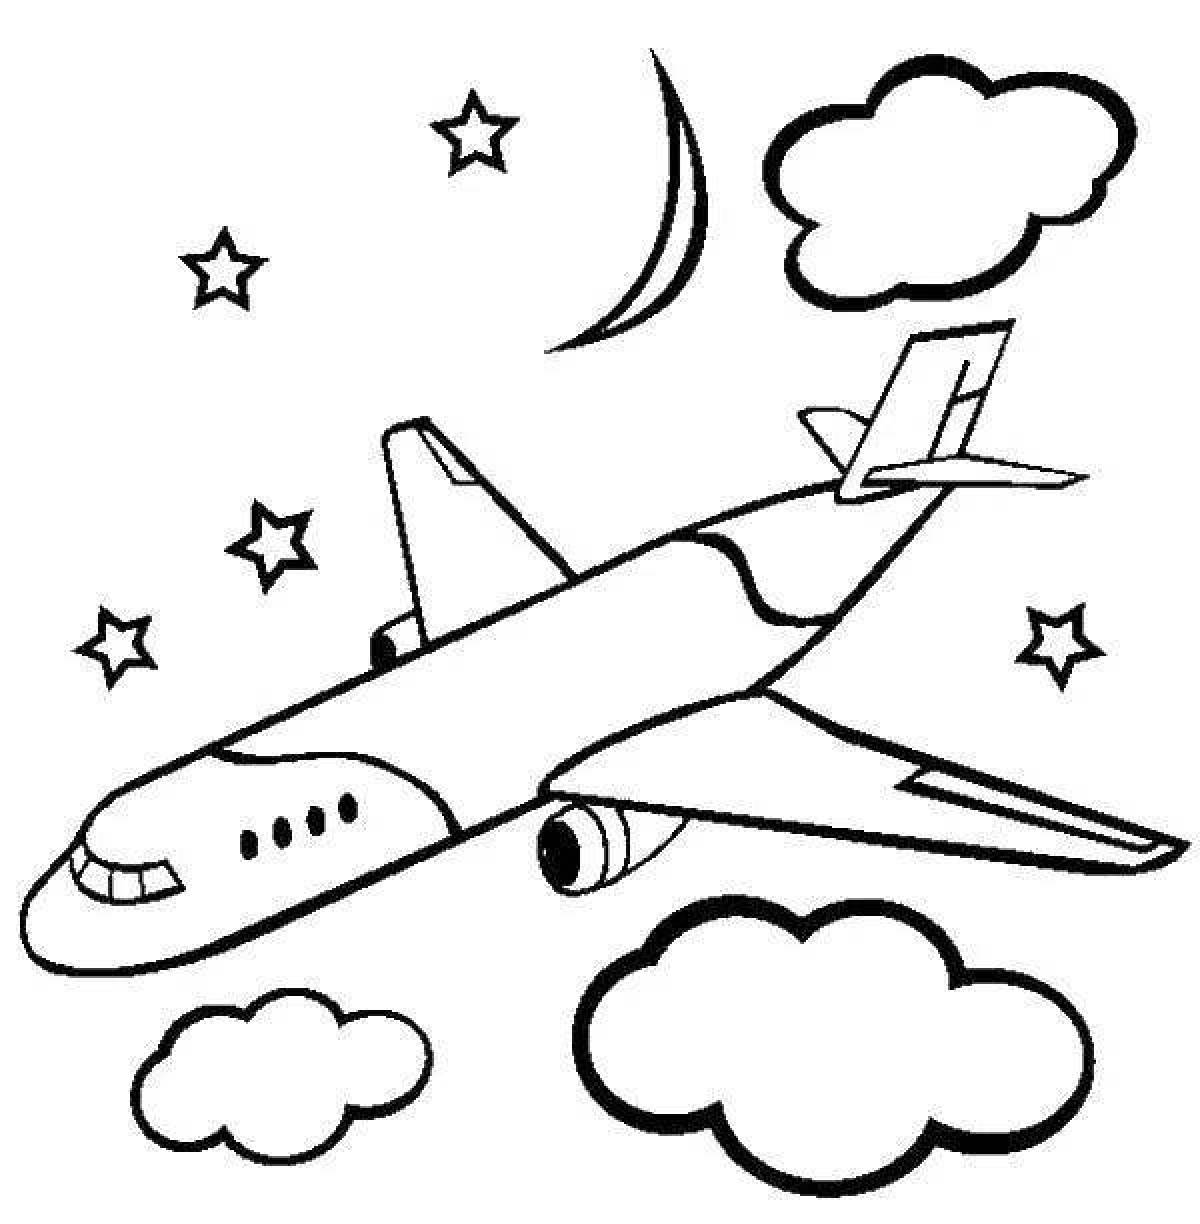 Coloring book with a bold drawing of an airplane